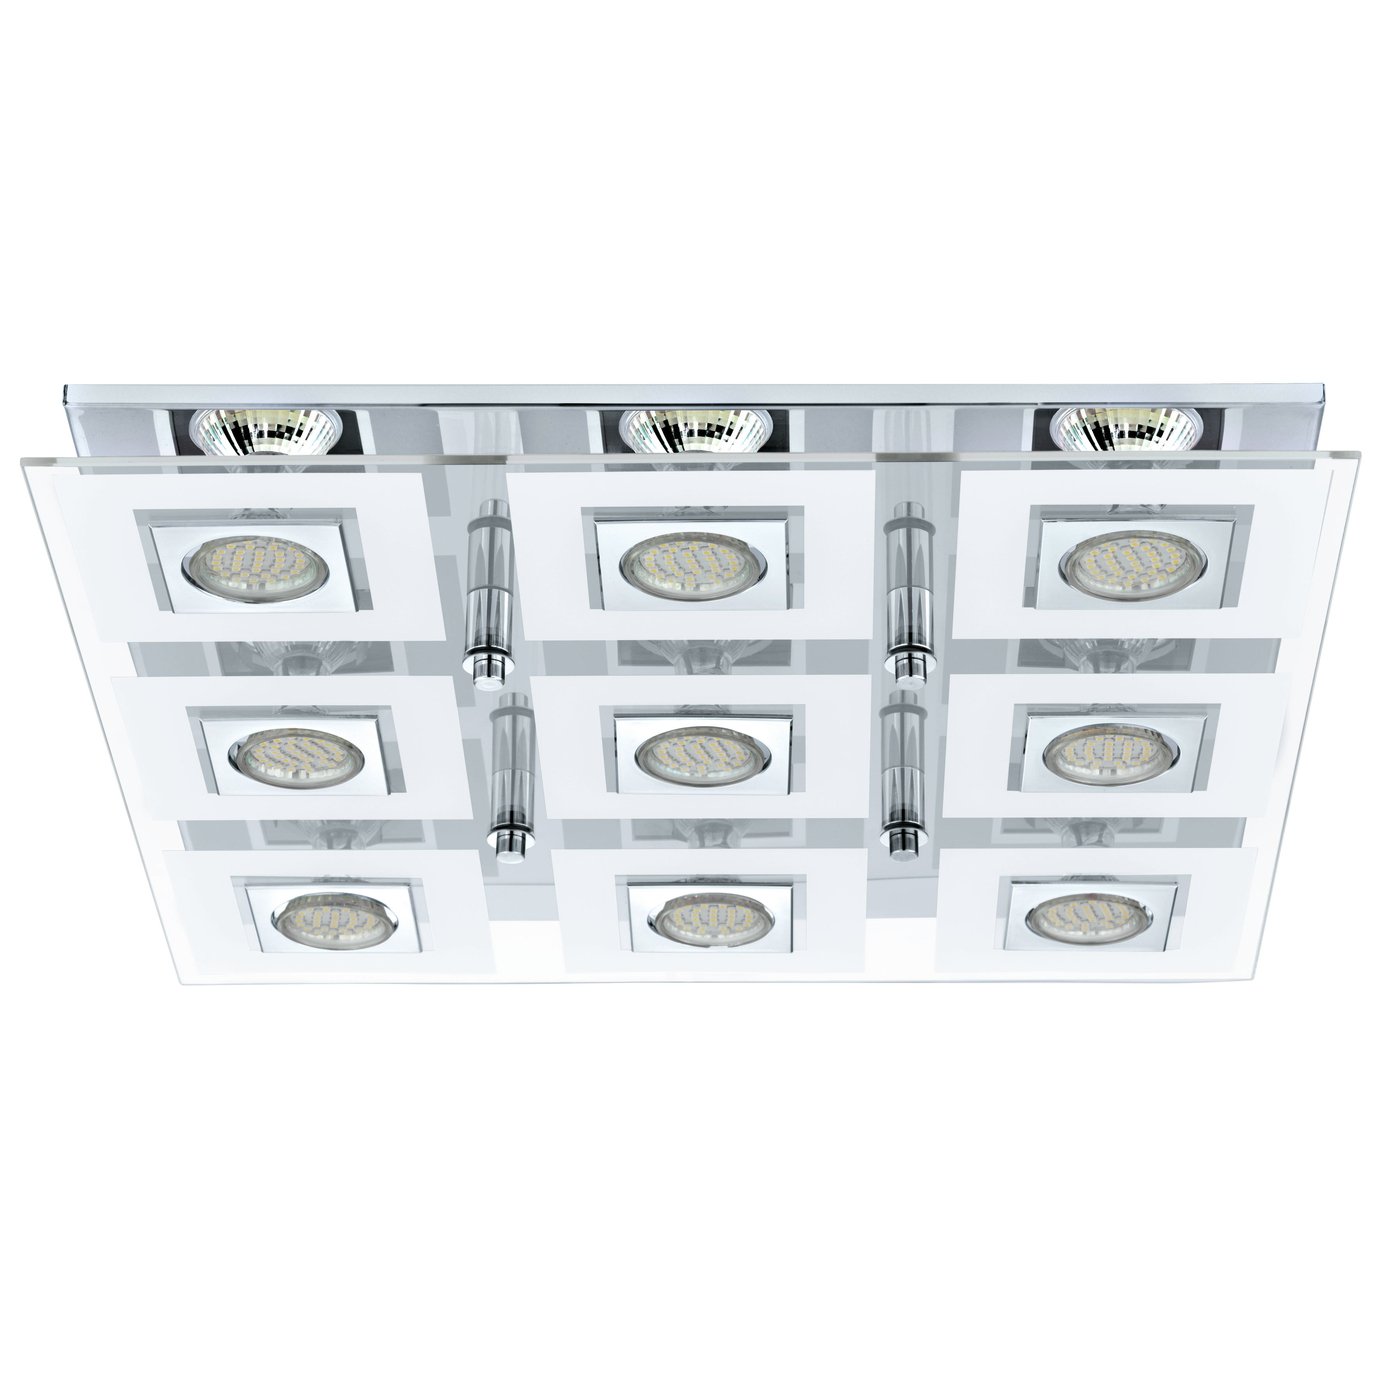 Eglo Cabo 9 Point Square LED Ceiling Light review